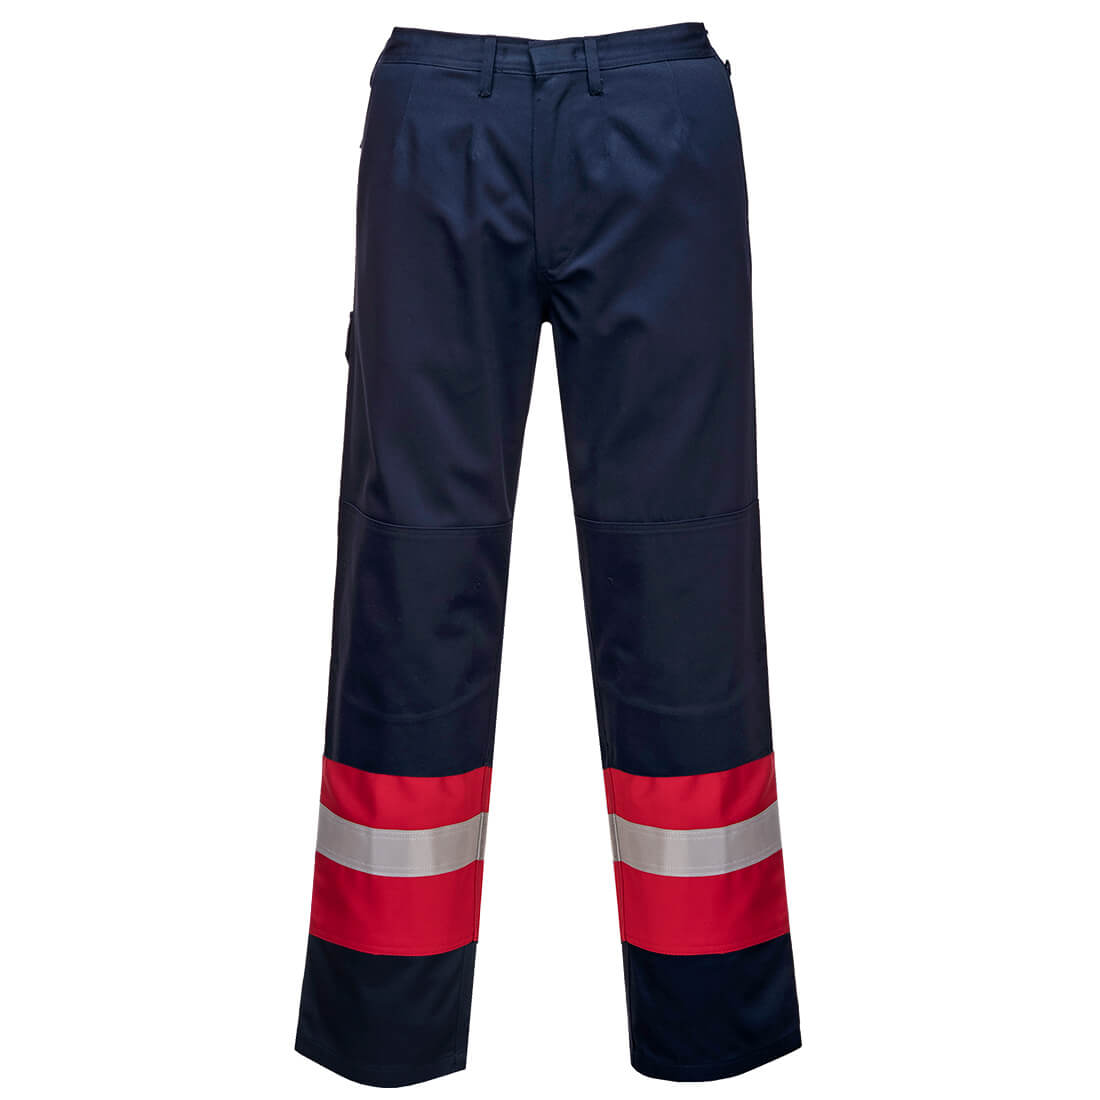 Bizflame Work Trousers  (FR56)